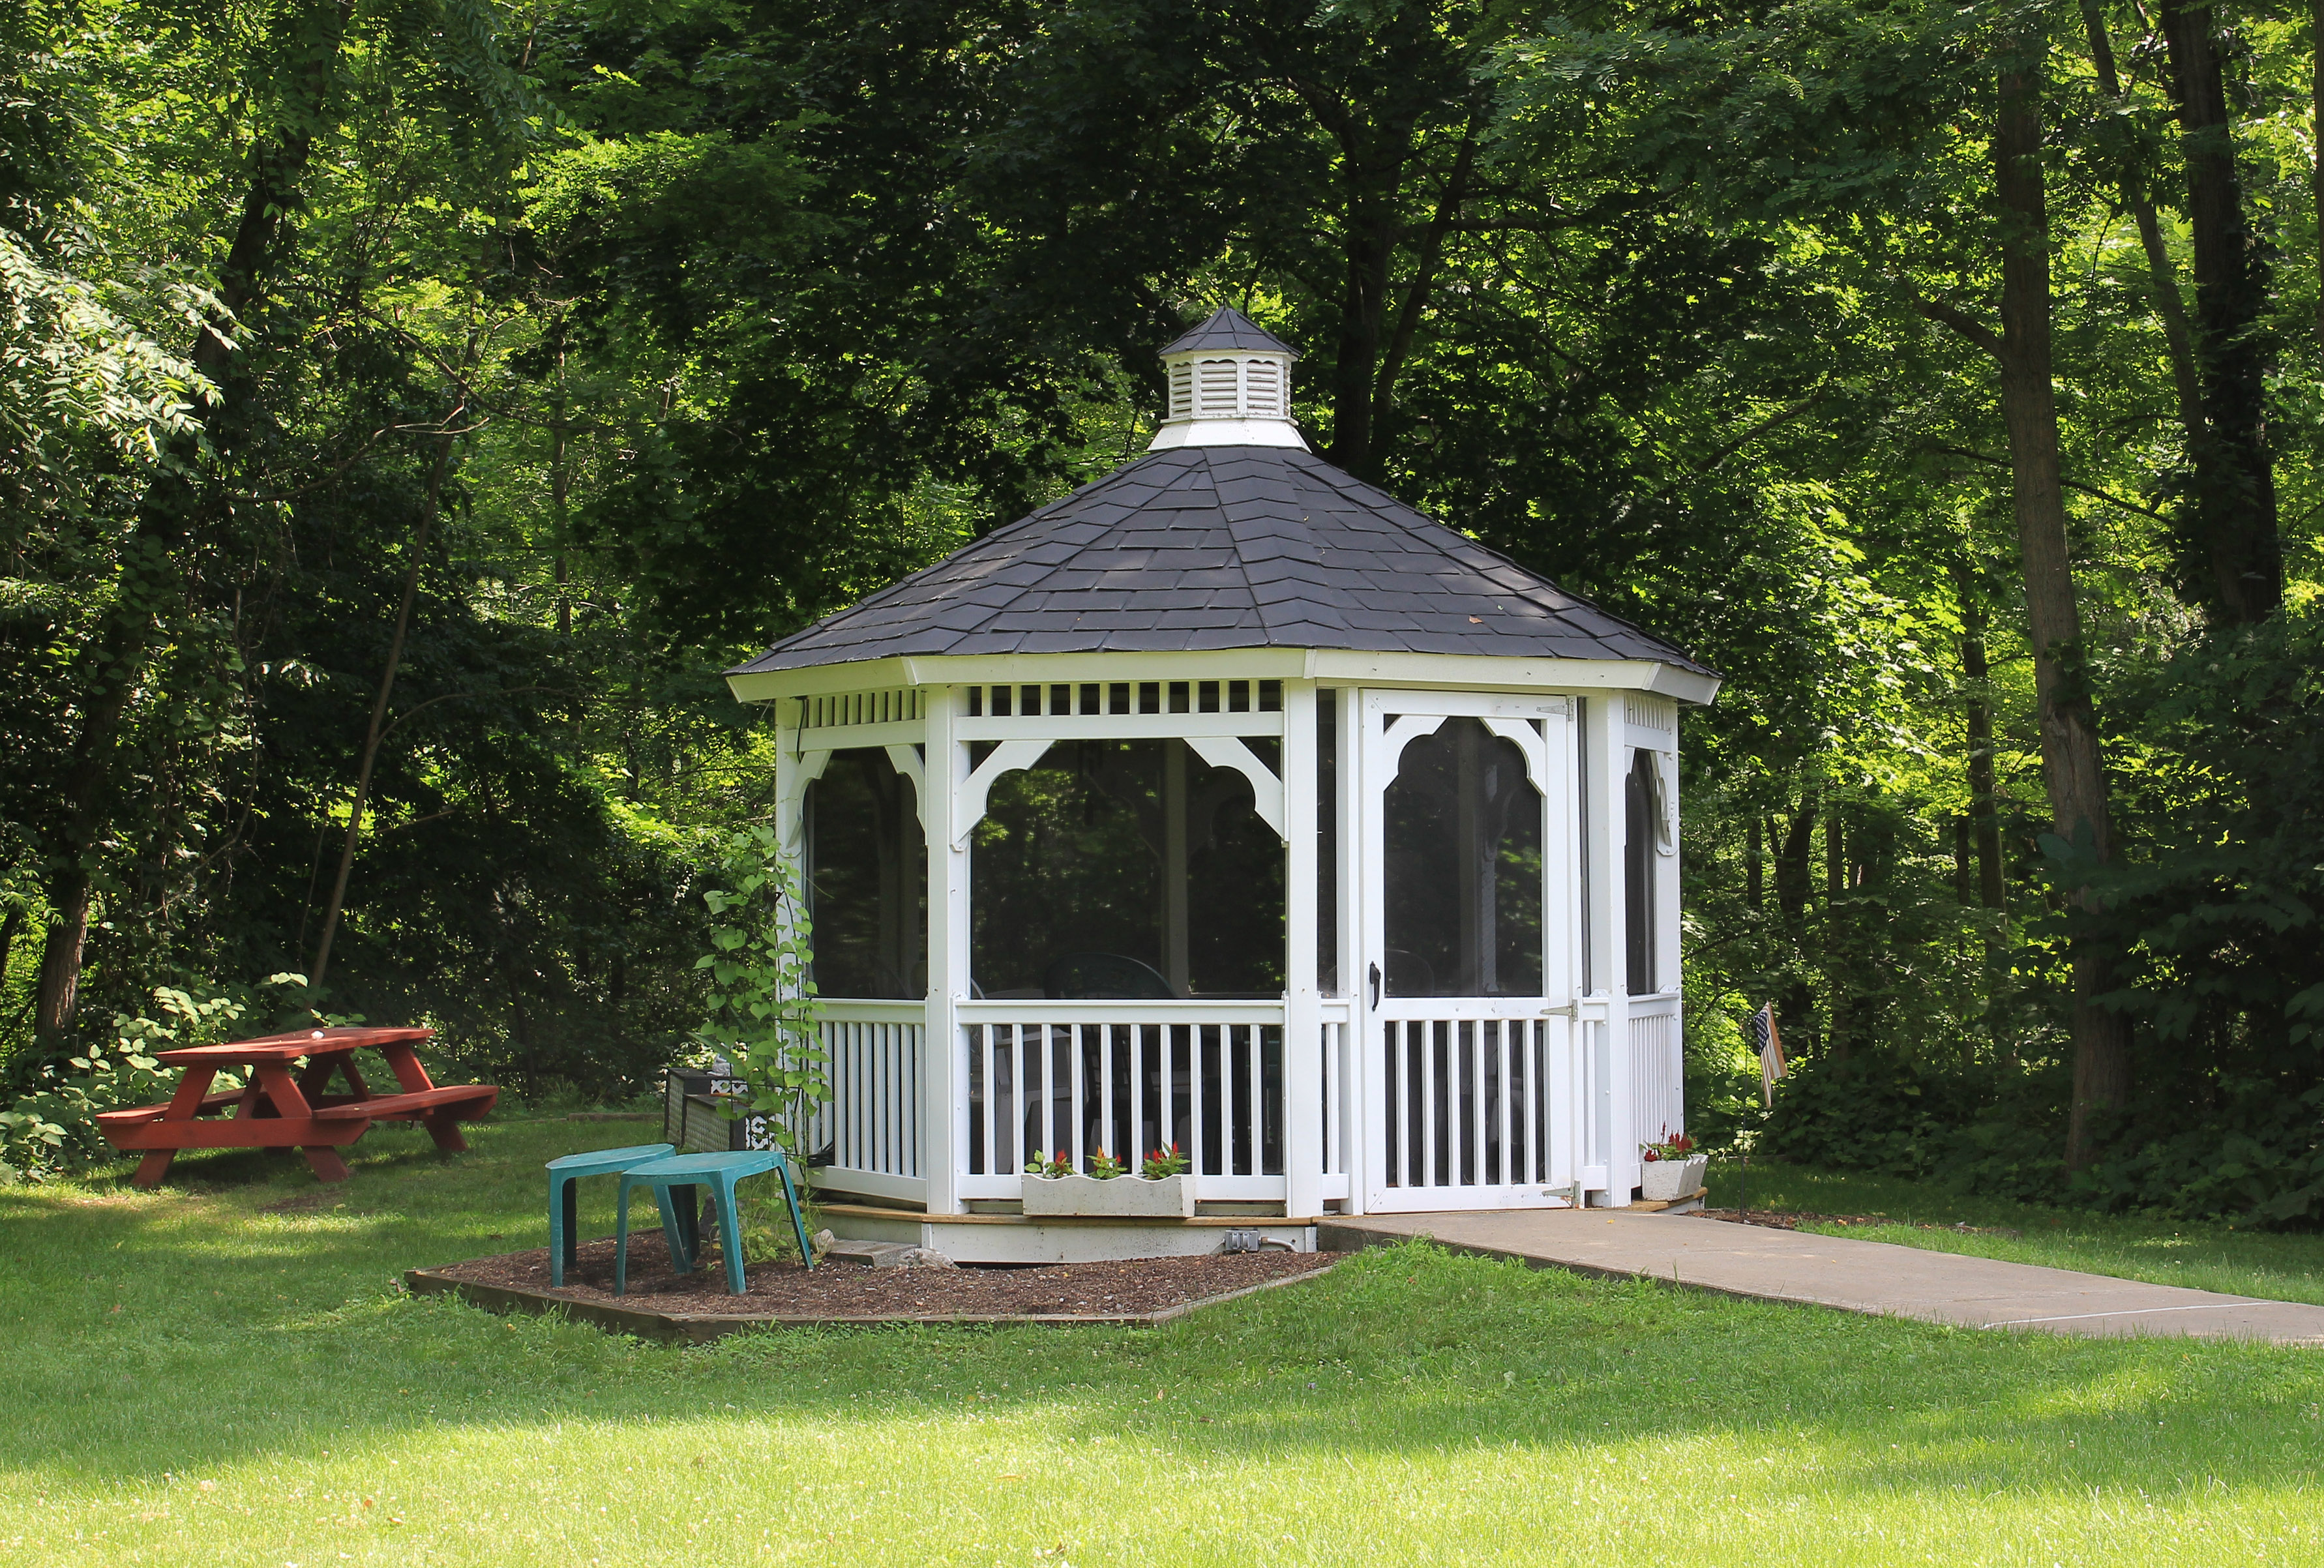 property management company client list syracuse ny gazebo image of upper crown landing apartments